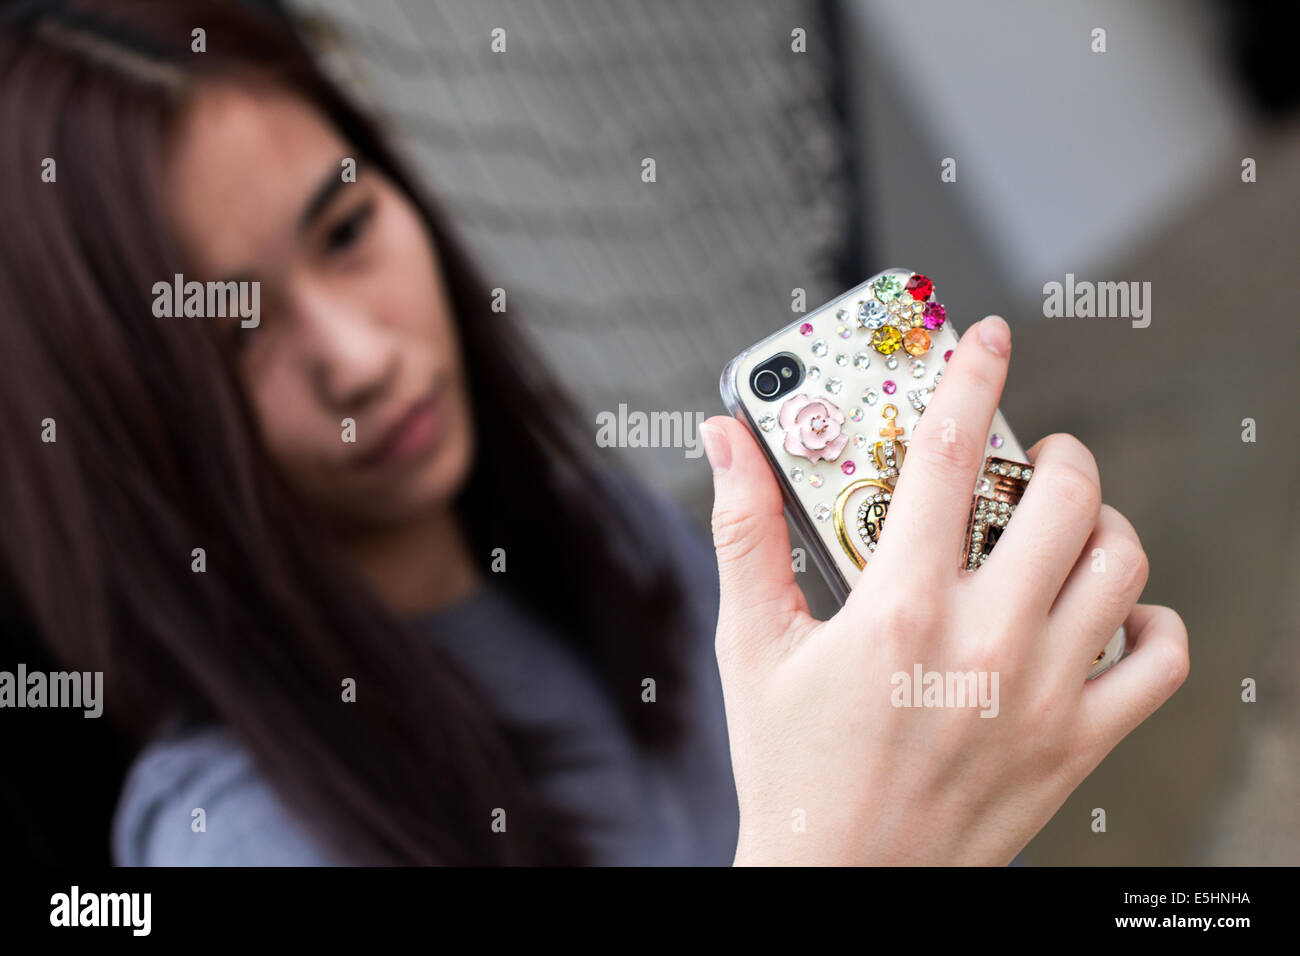 A girl is taking selfies. Stock Photo